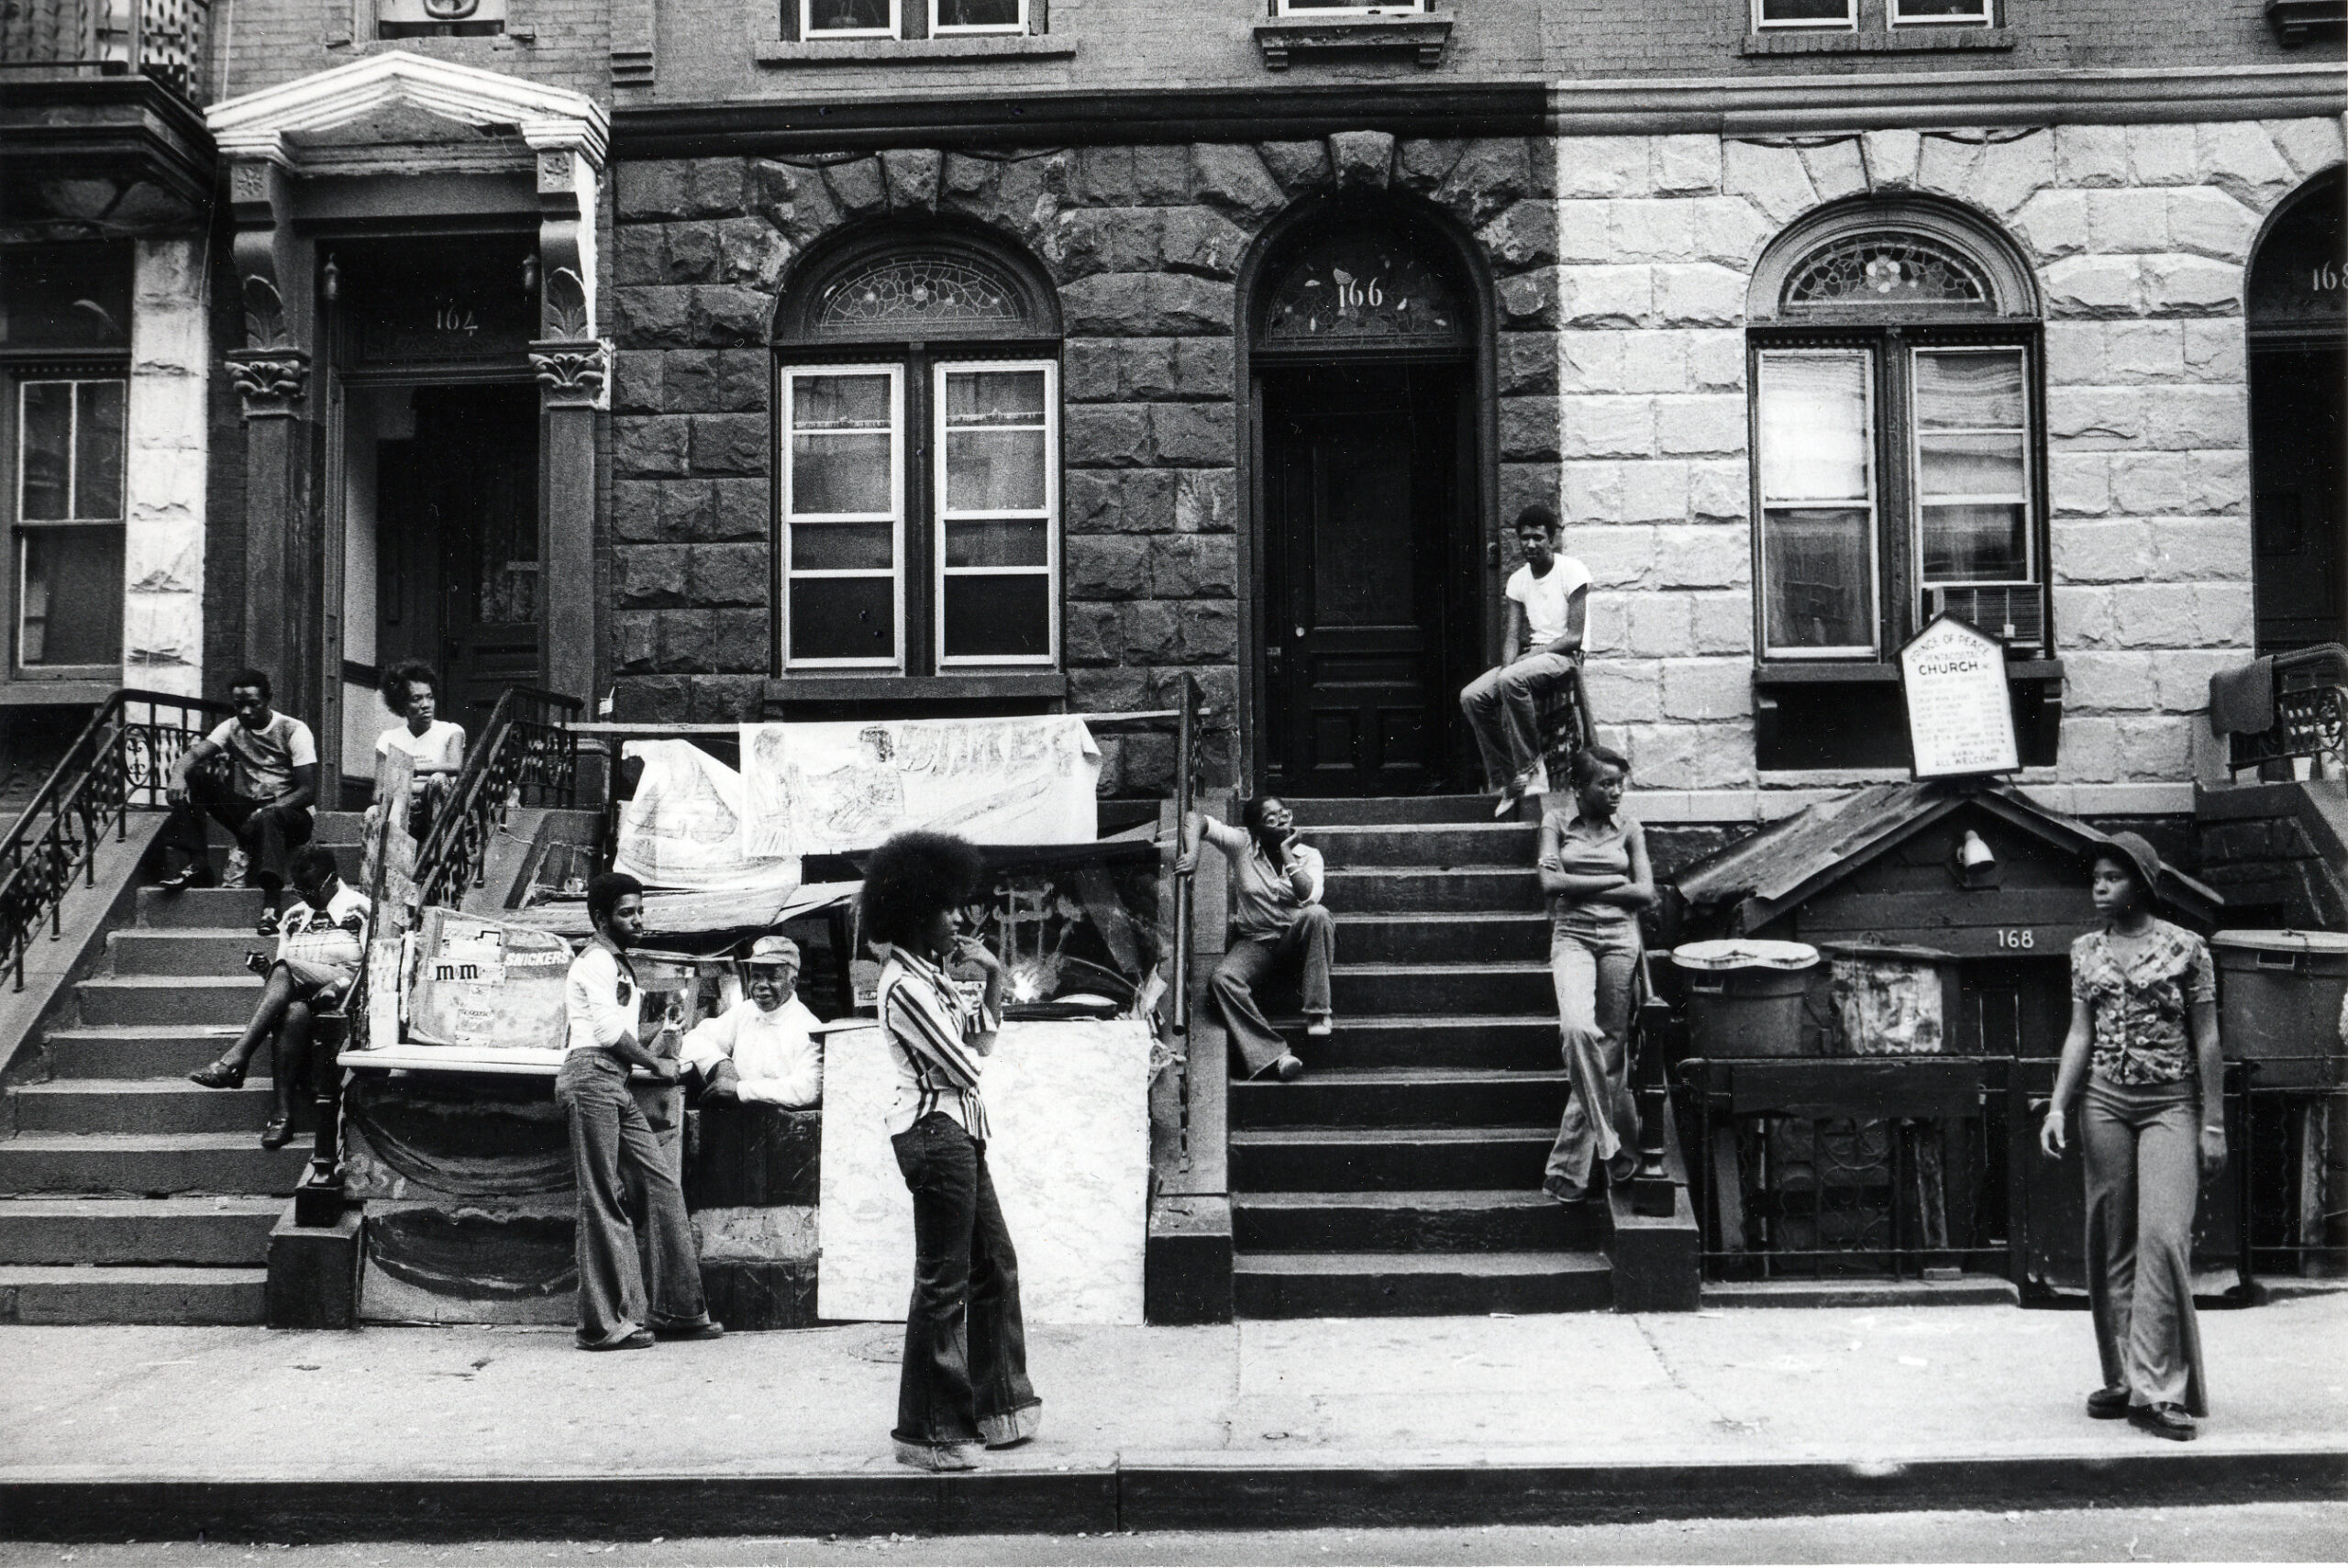 Harlem Street, 1976–77. Gelatin silver print, 5 5/16 x 8 15/16 inches. © Carrie Mae Weems. Courtesy of the artist and Jack Shainman Gallery, New York.